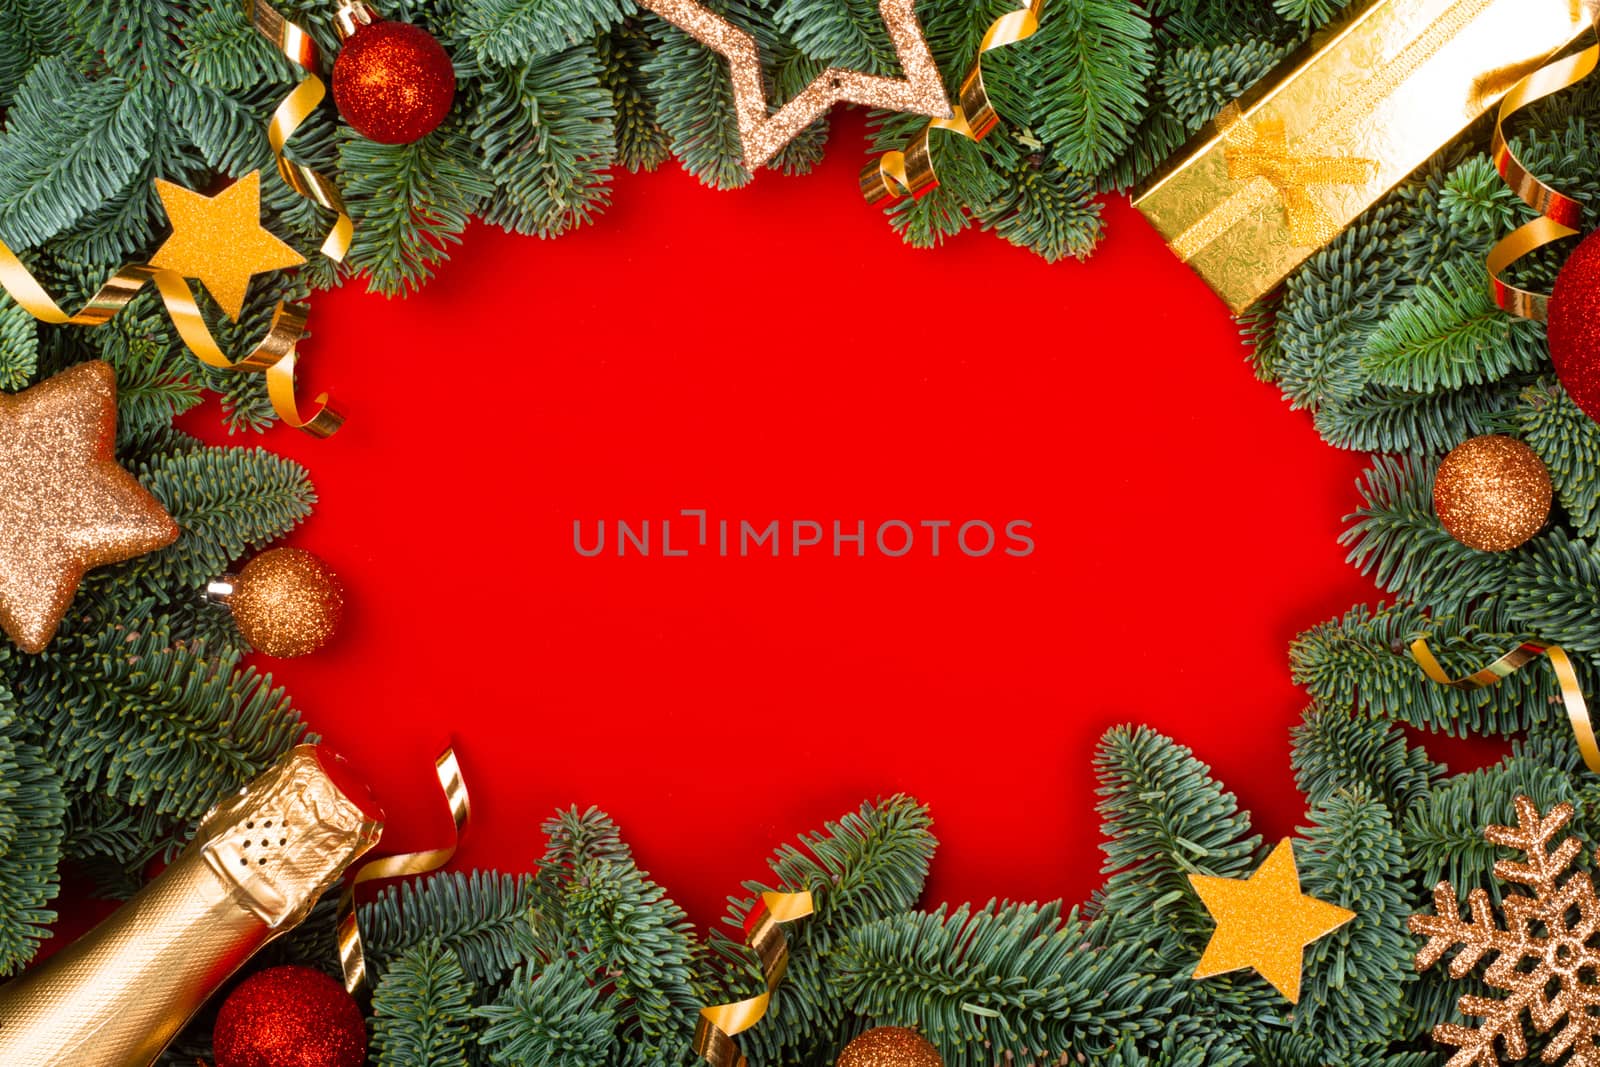 Christmas fir tree branches and baubles decor border frame on red background with copy space for text